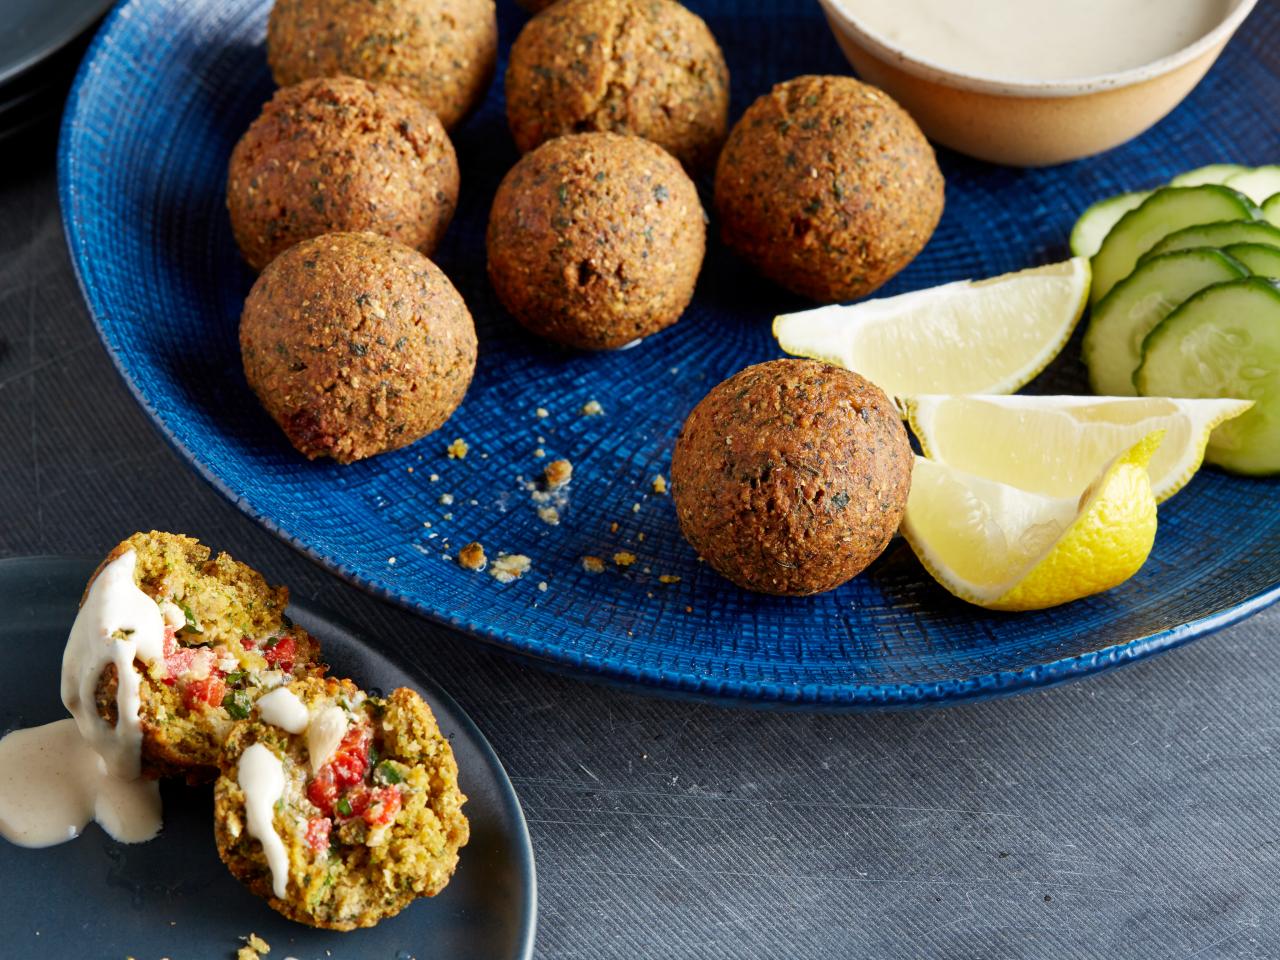 What Is Falafel? And How to Make Falafel | Cooking School | Food Network